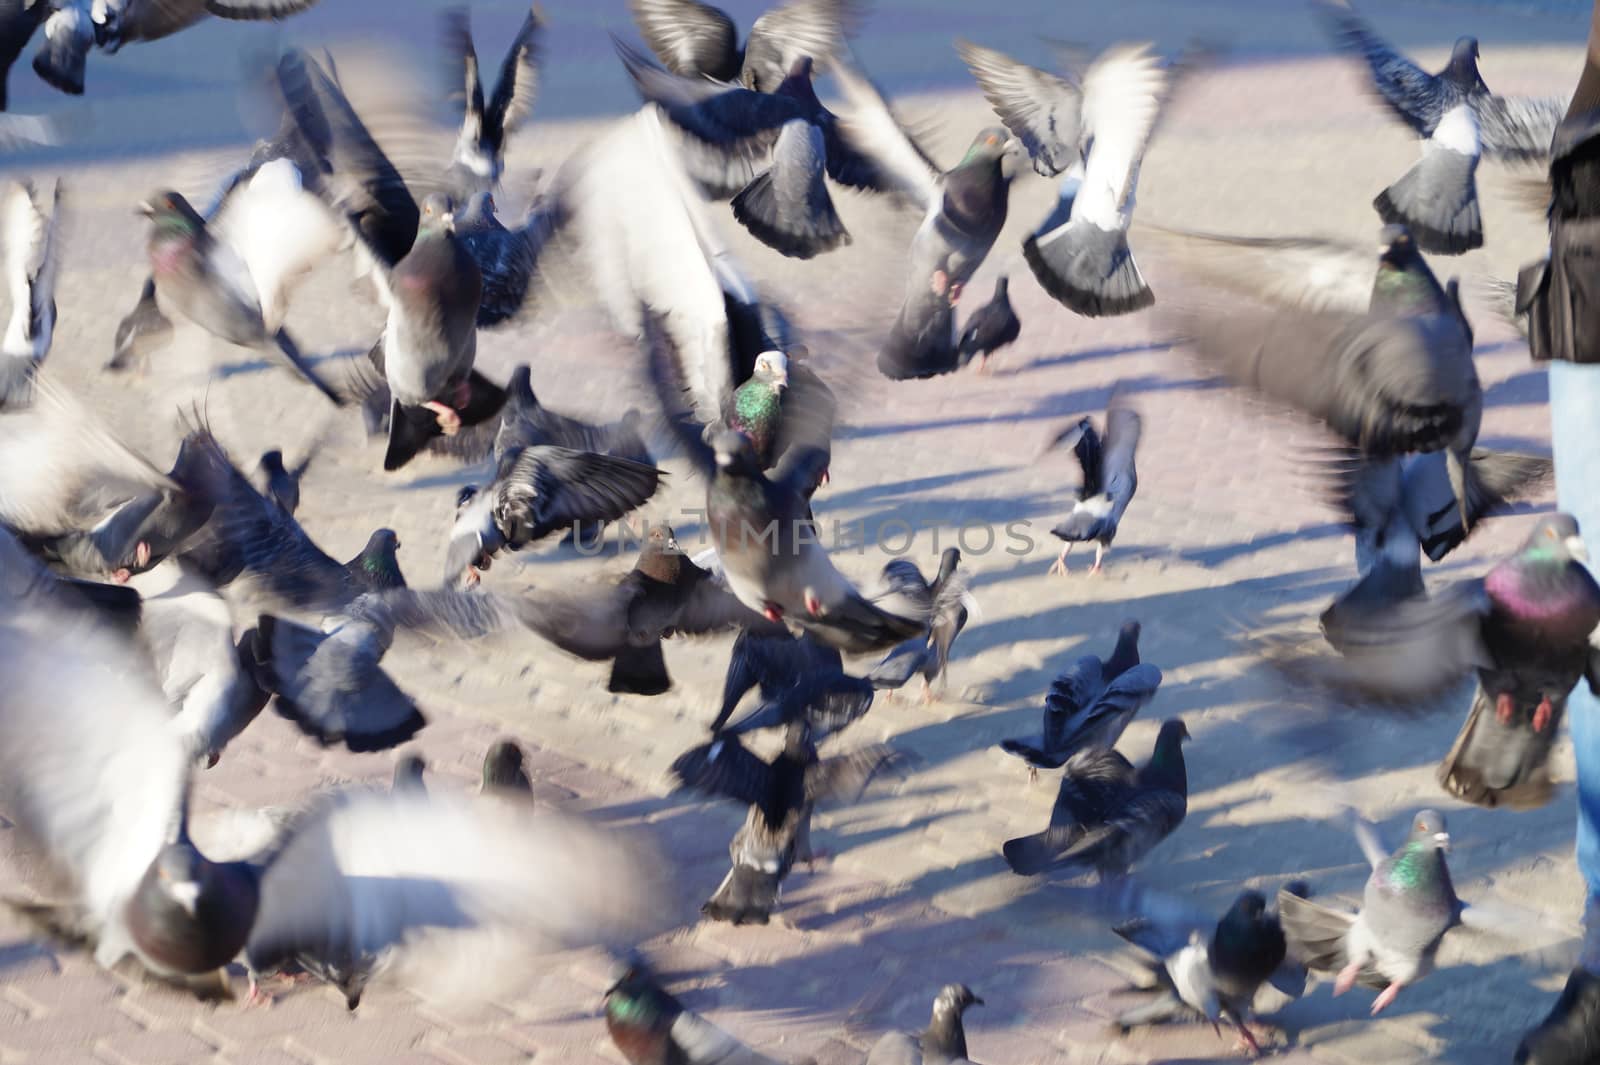 a crowd of pigeons fly off in search of food abstract by Oleczka11